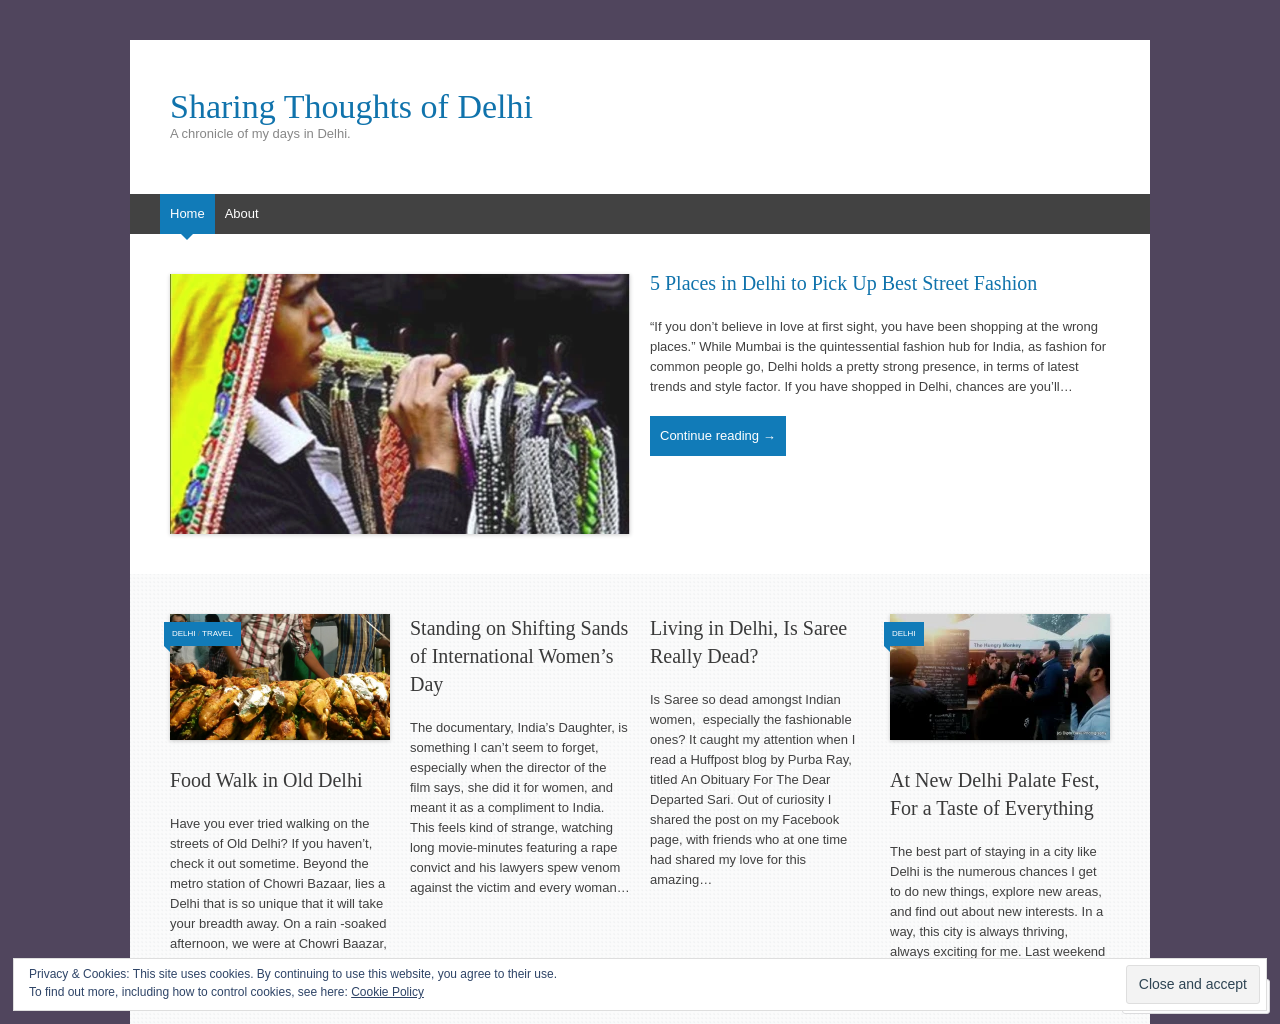 Sharing Thoughts of Delhi